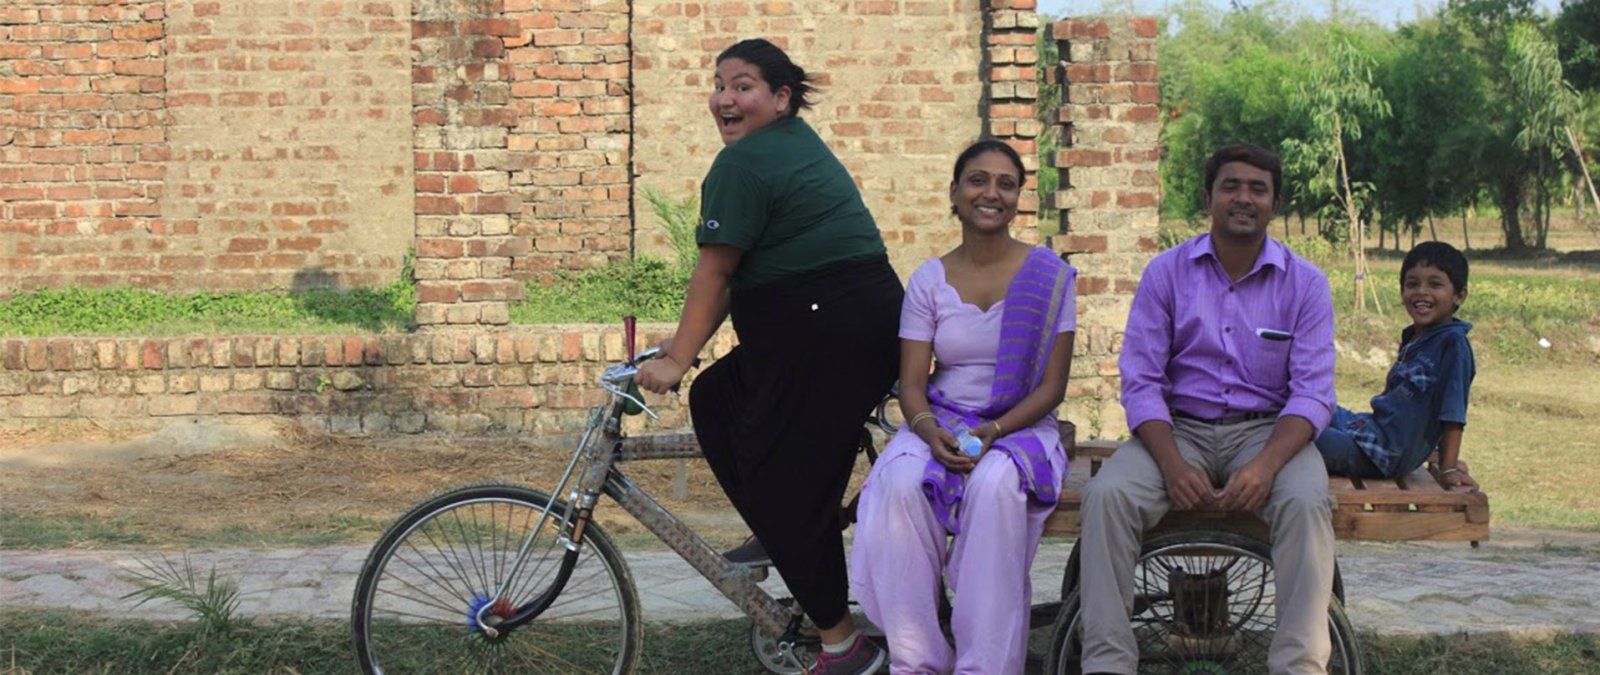 A student pedals a bike carrying a family in India.